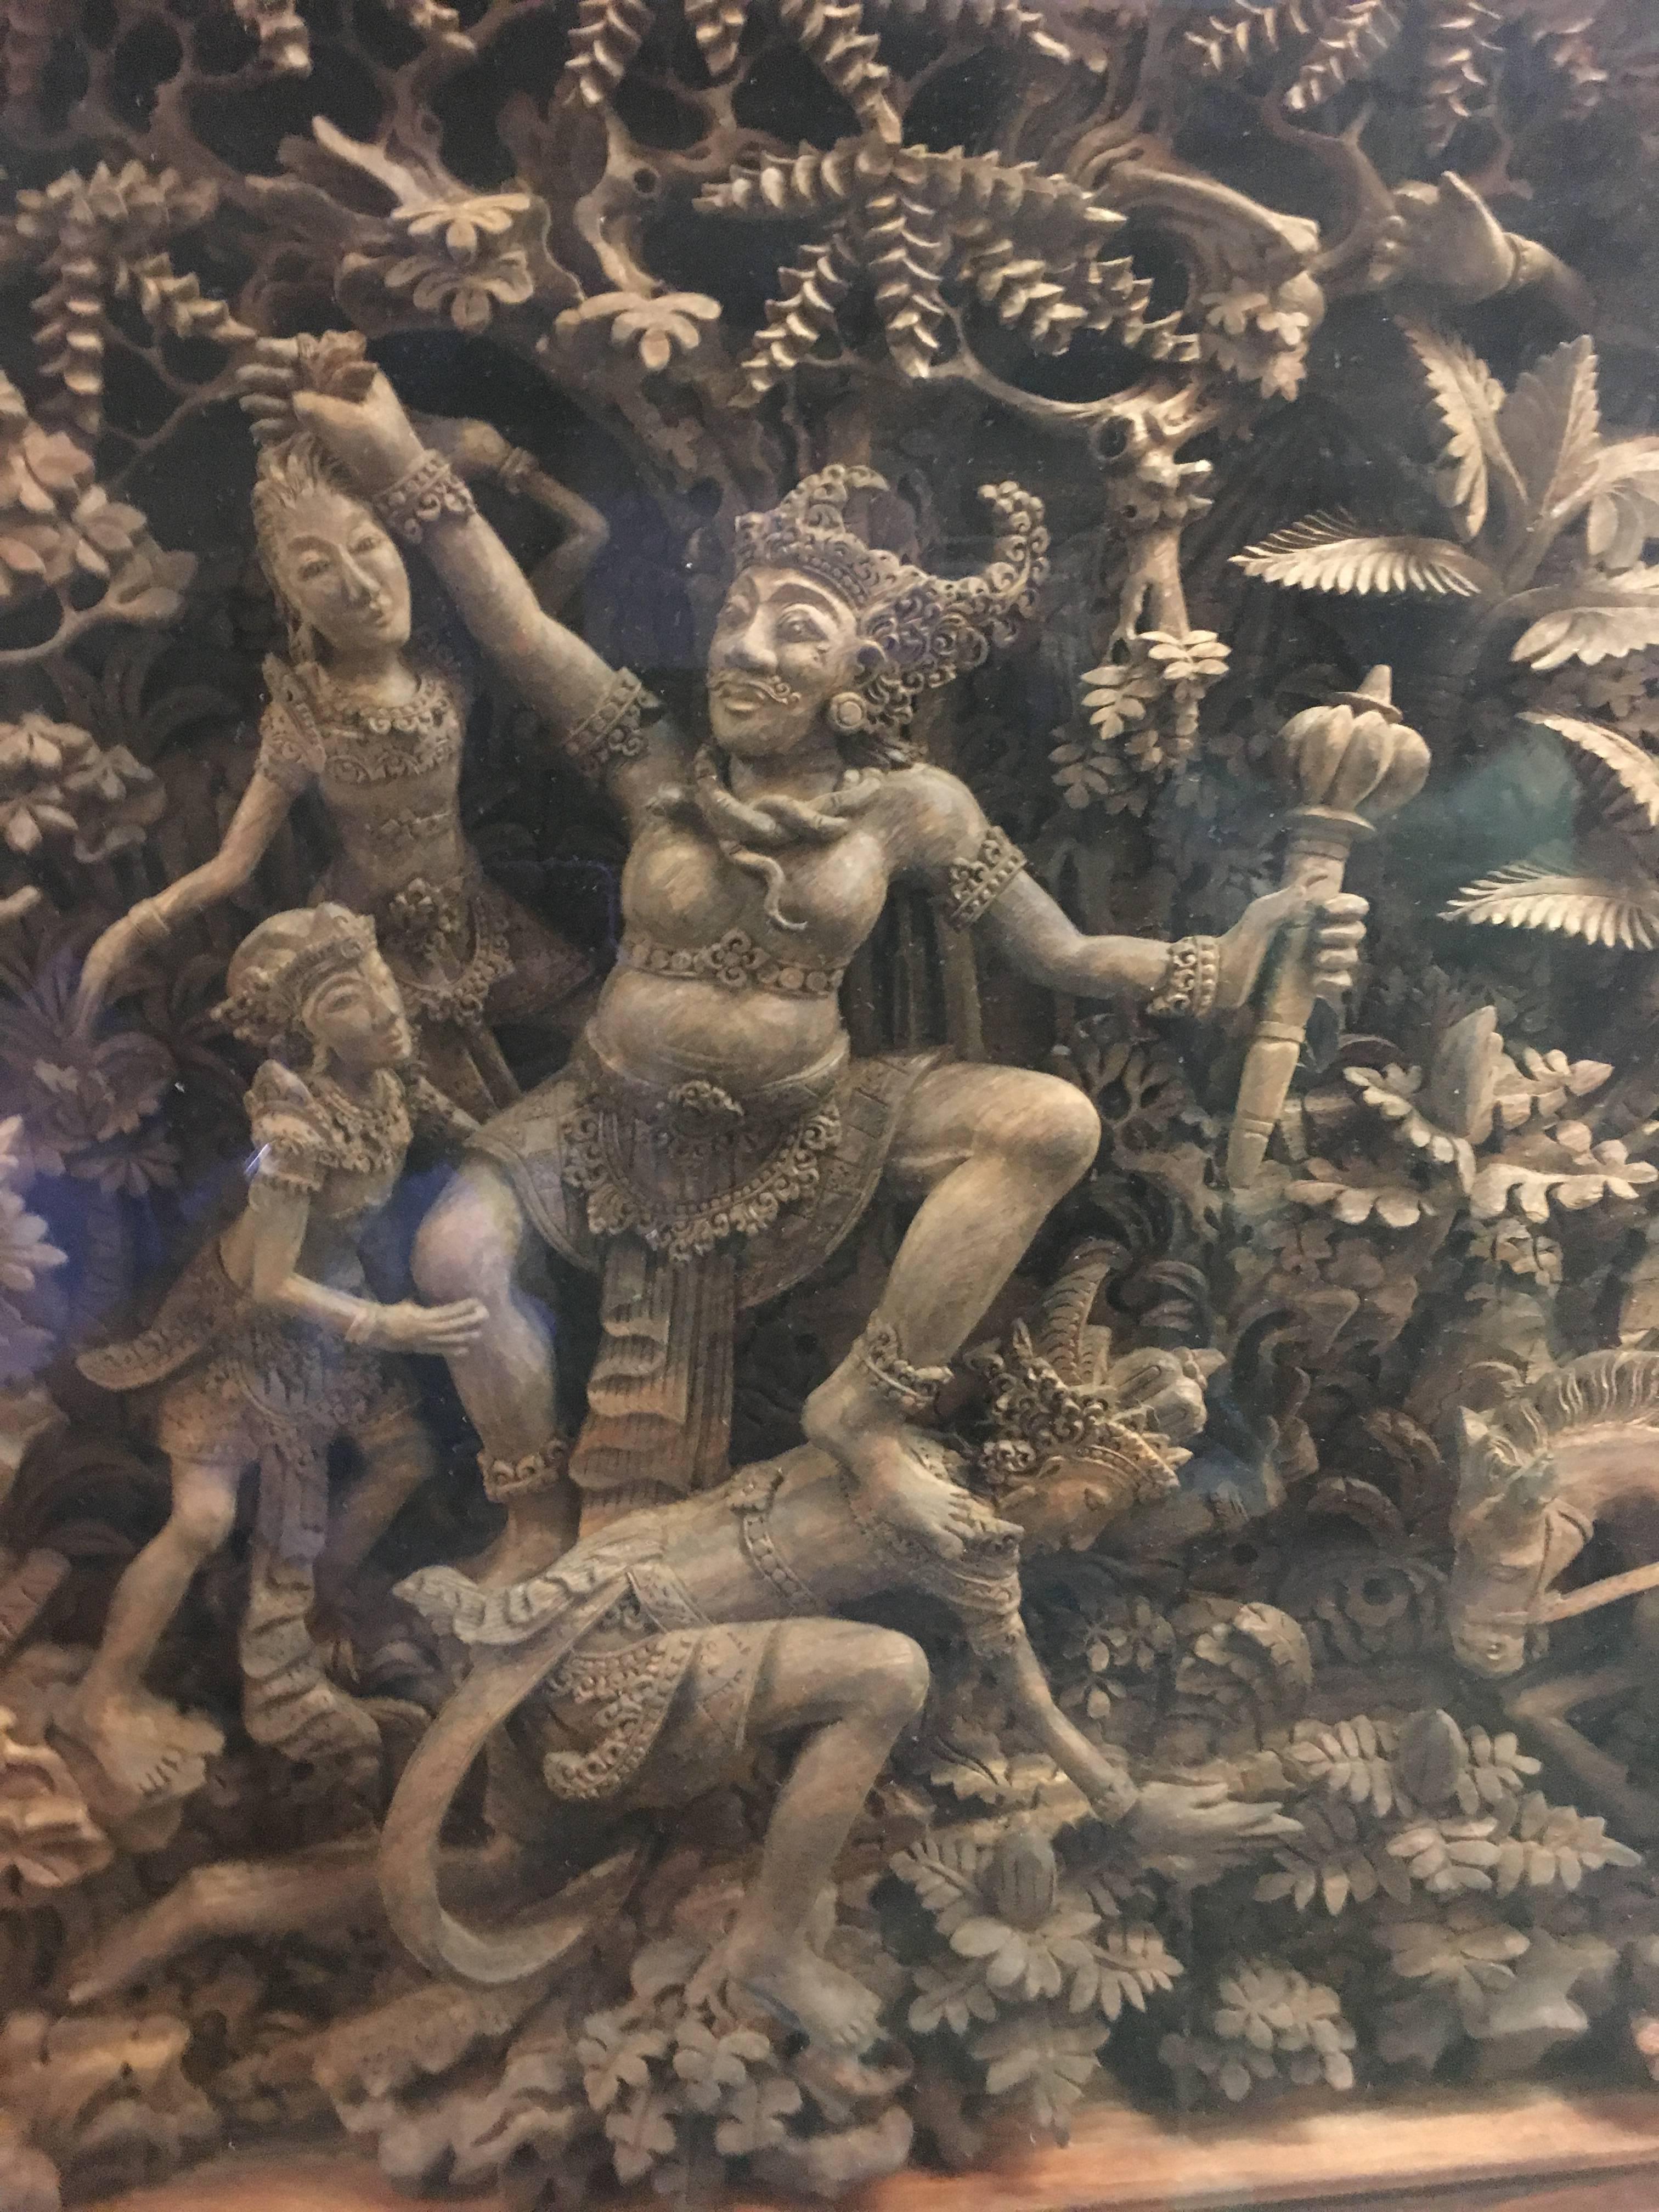 A massive carved teak panel featuring the decisive battle scene in the Hindu epic, the Ramayana, between Prince Rama and the Demon King Ravana. 
The scene is deeply carved in high relief from a single piece of timber. The Demon Ravana is portrayed